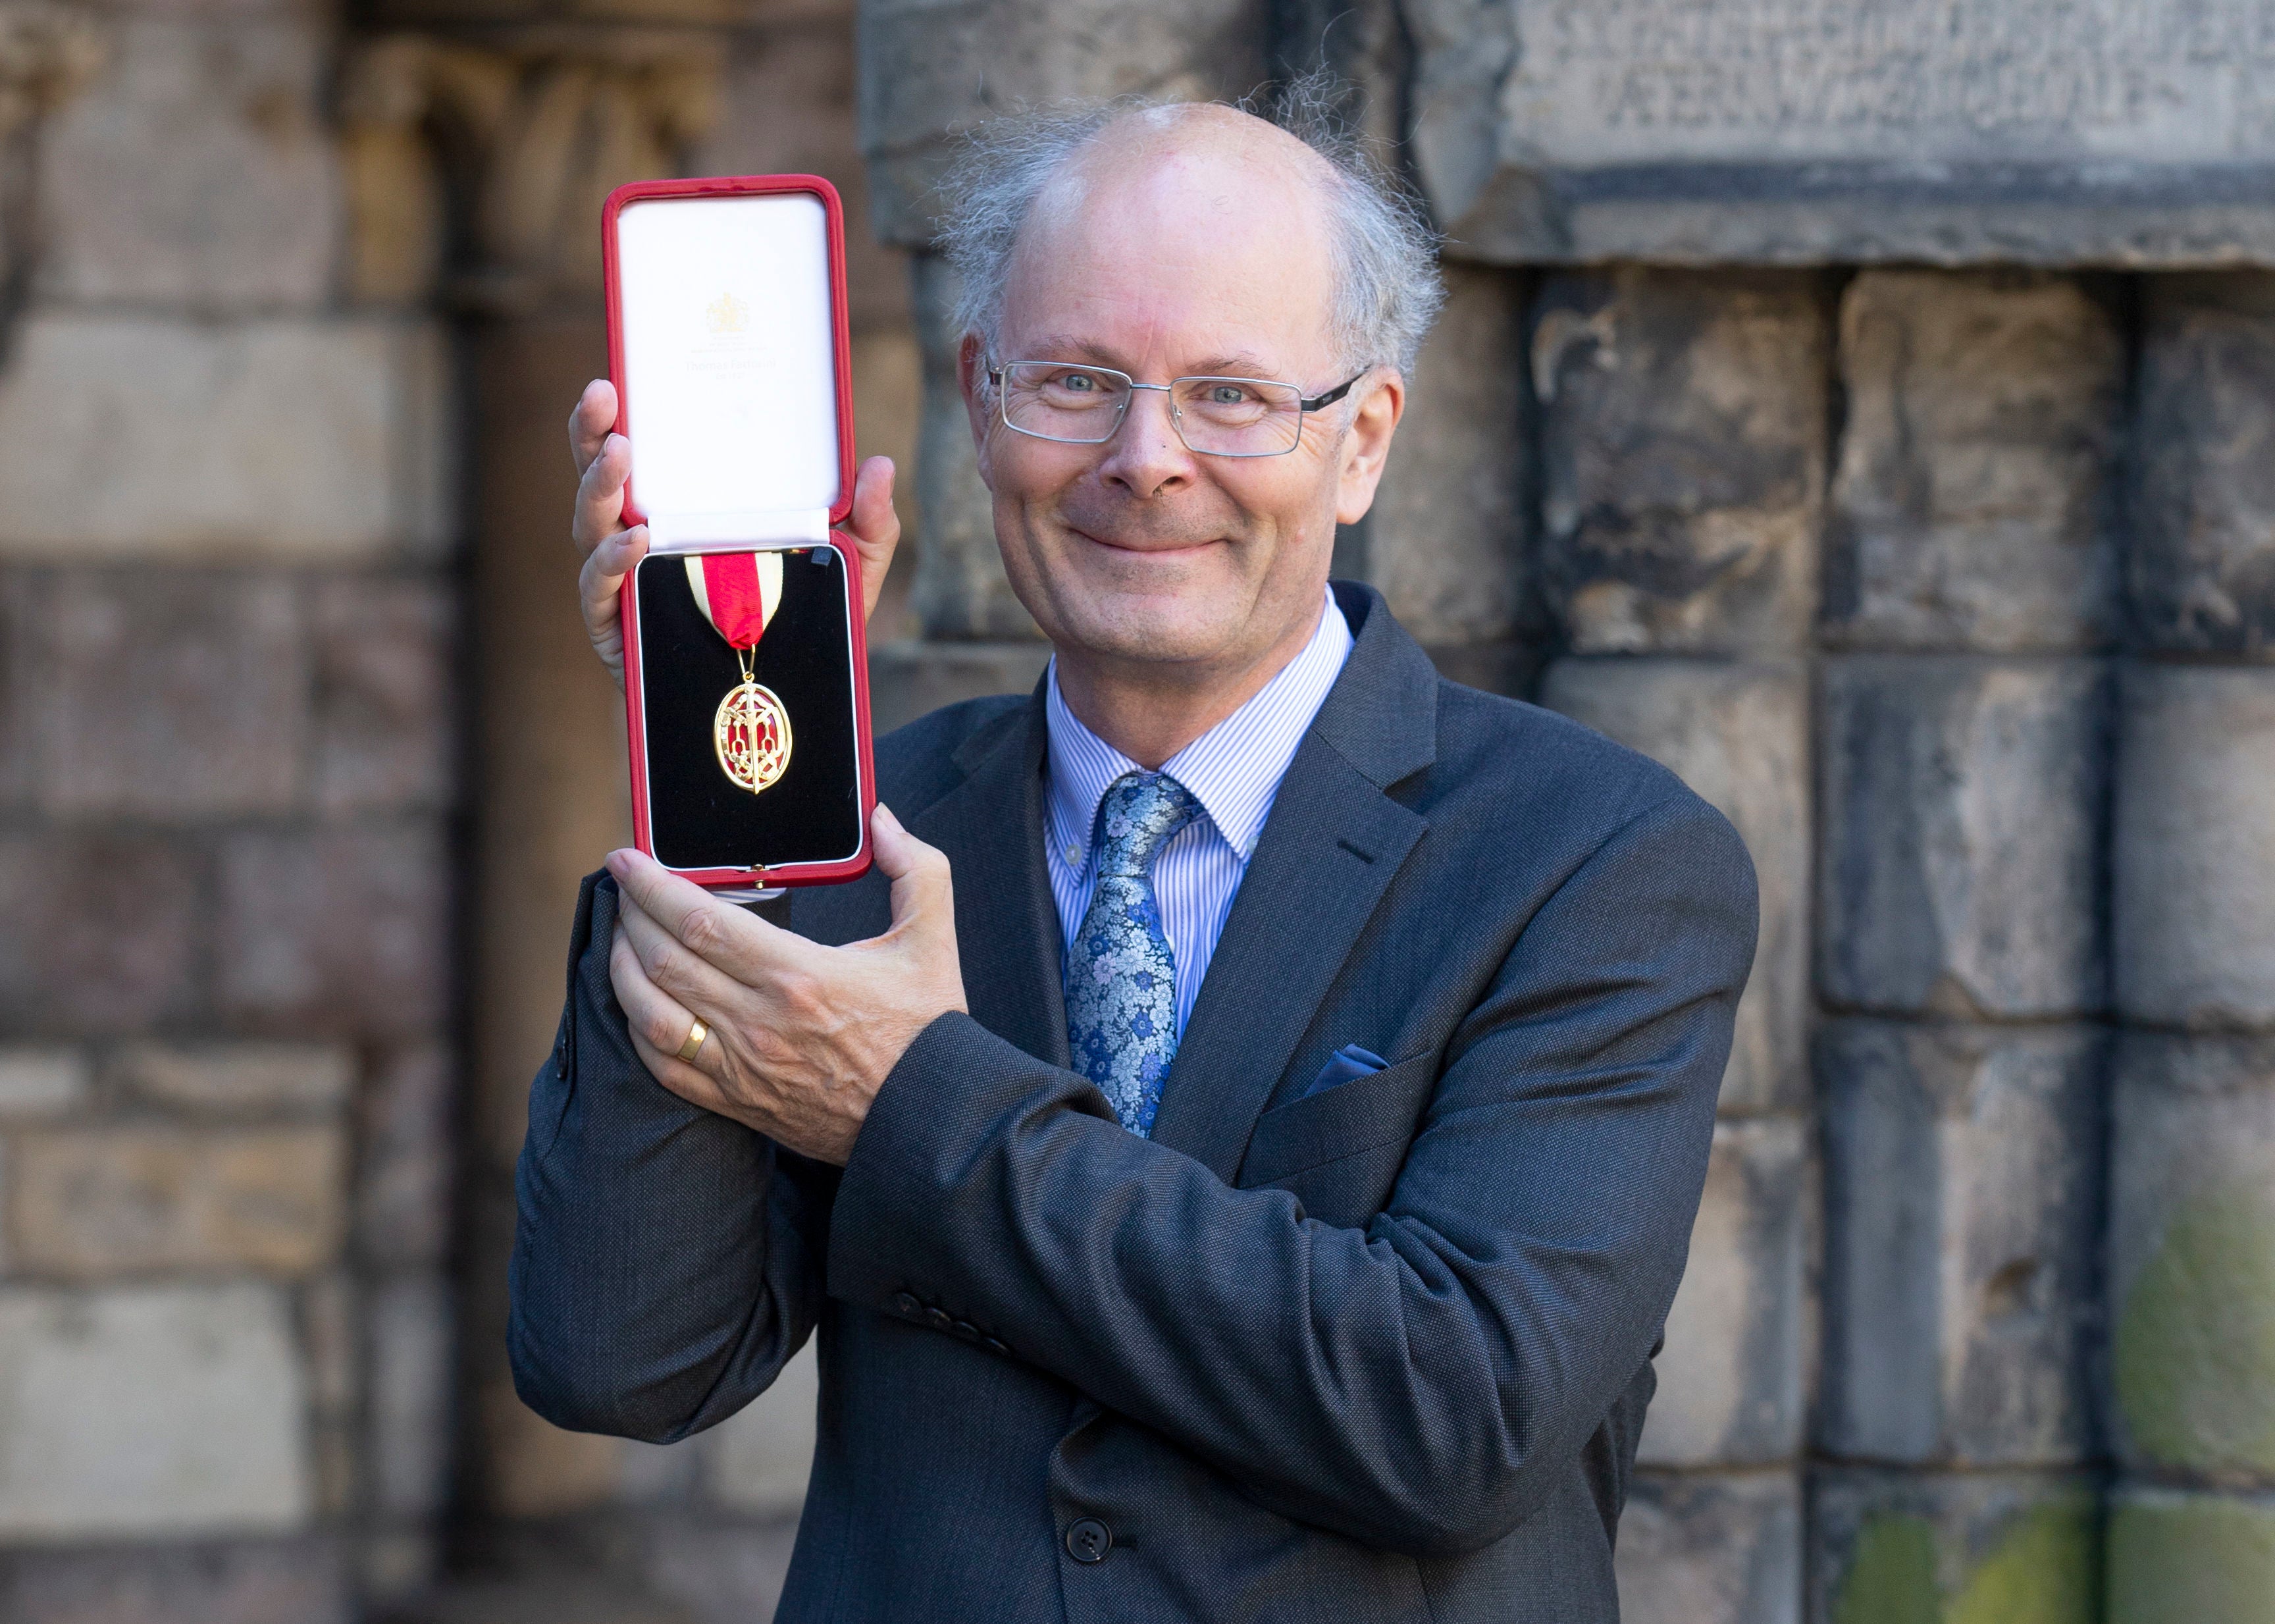 Sir John Curtice is Britain’s leading pollster